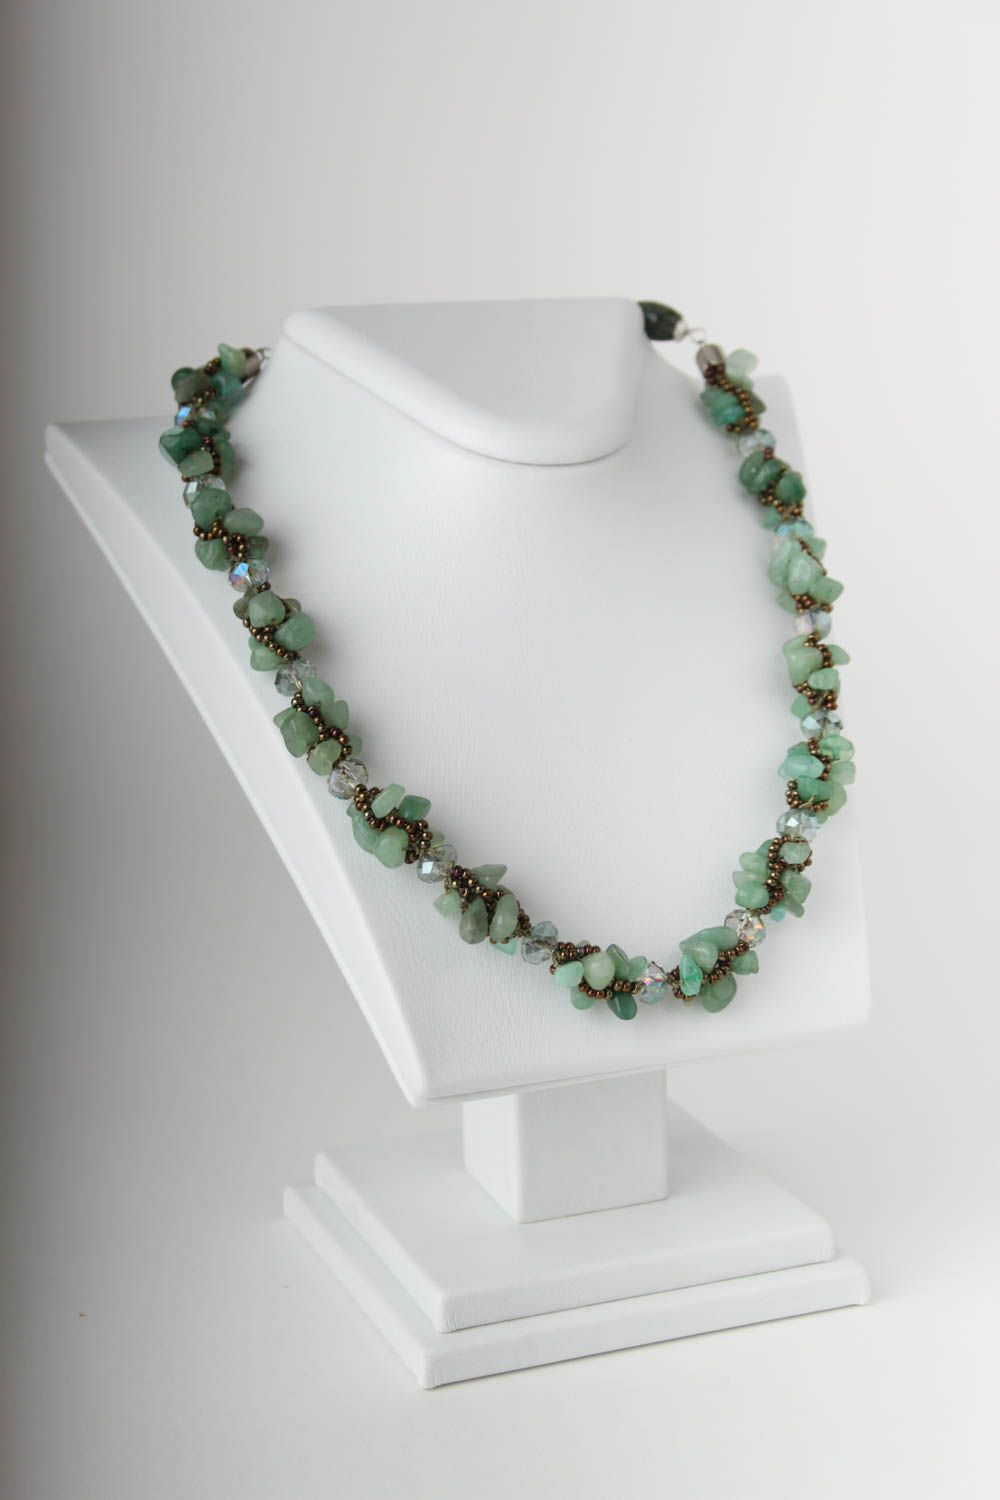 Handmade beaded necklace handmade necklace with natural stones stylish jewelry photo 1